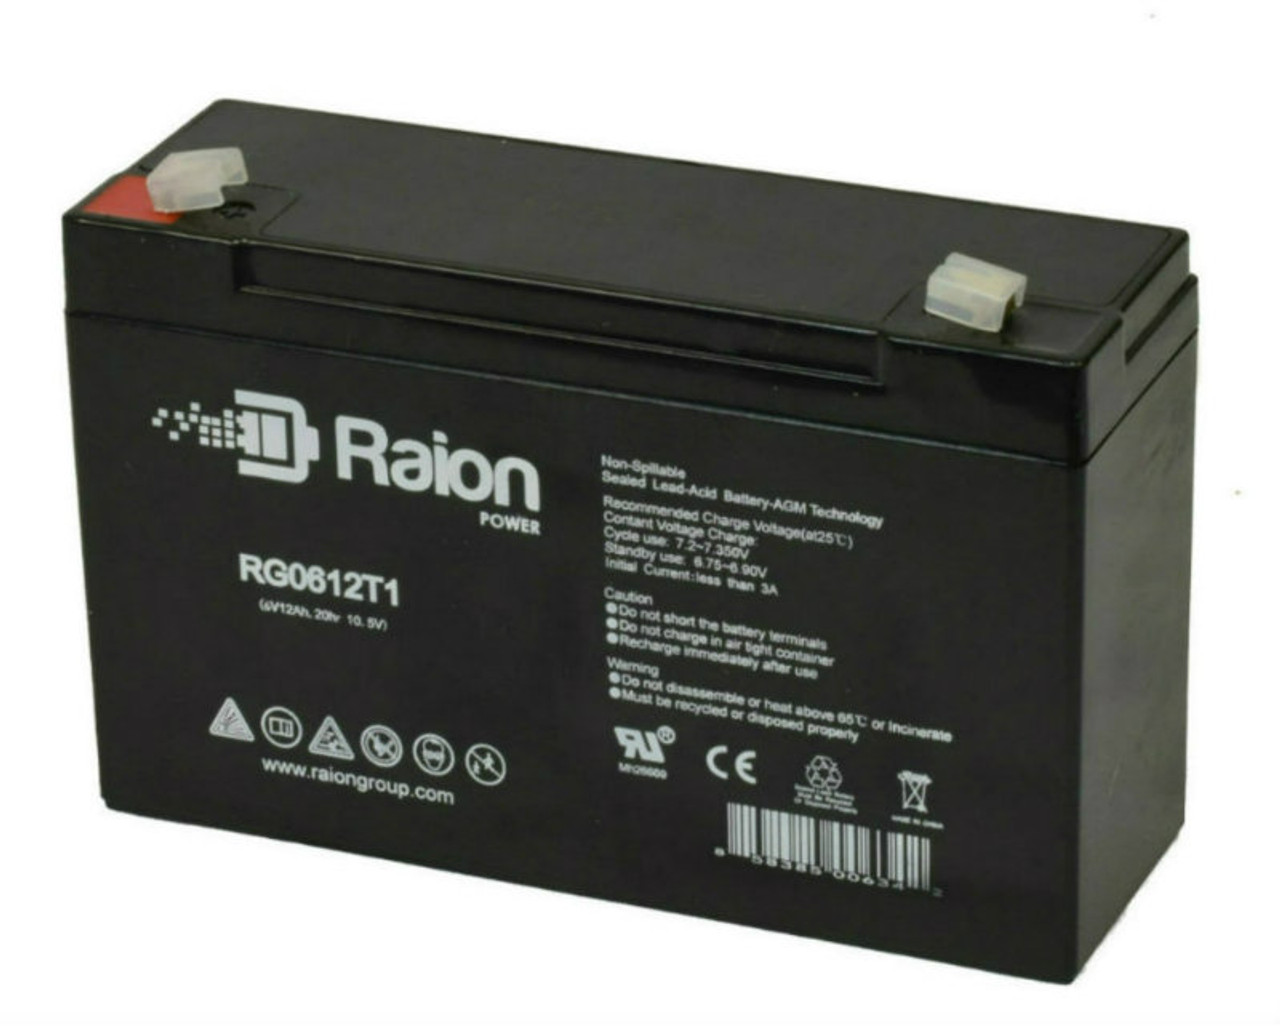 Raion Power RG06120T1 Replacement Battery for Green Cell AGM01